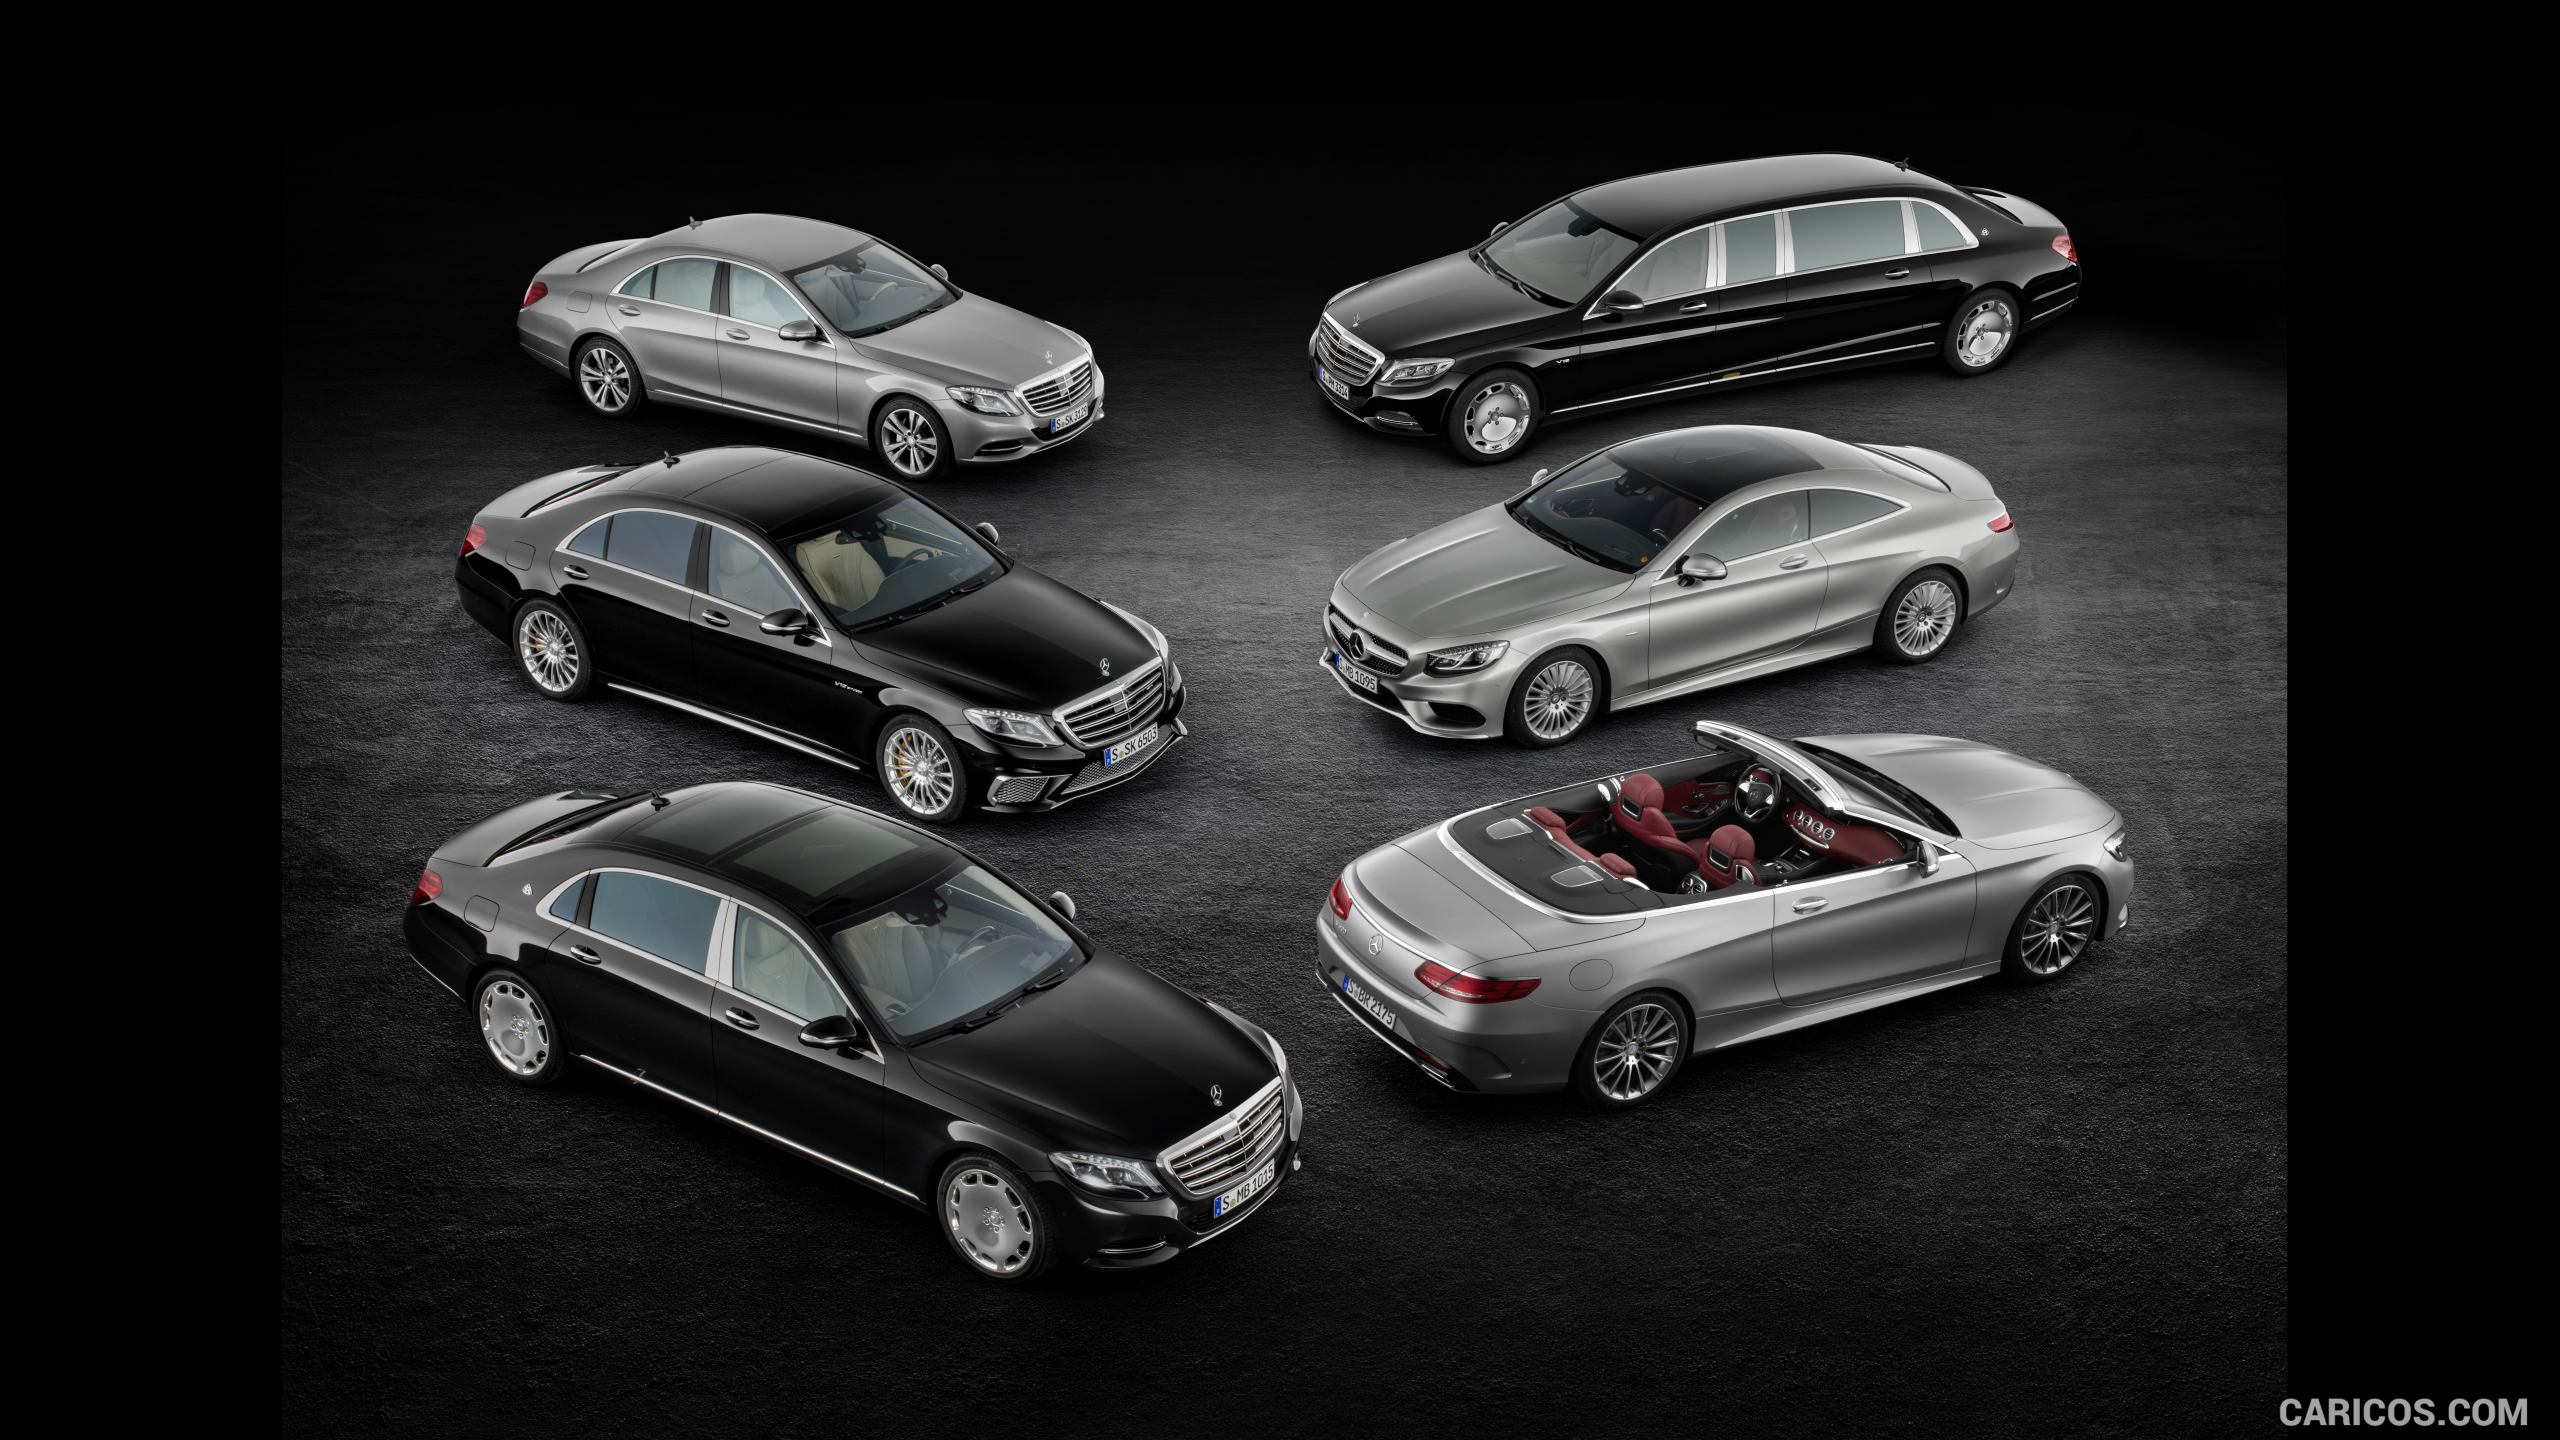 2017 Mercedes-Benz S-Class and S-Class Family, #33 of 56